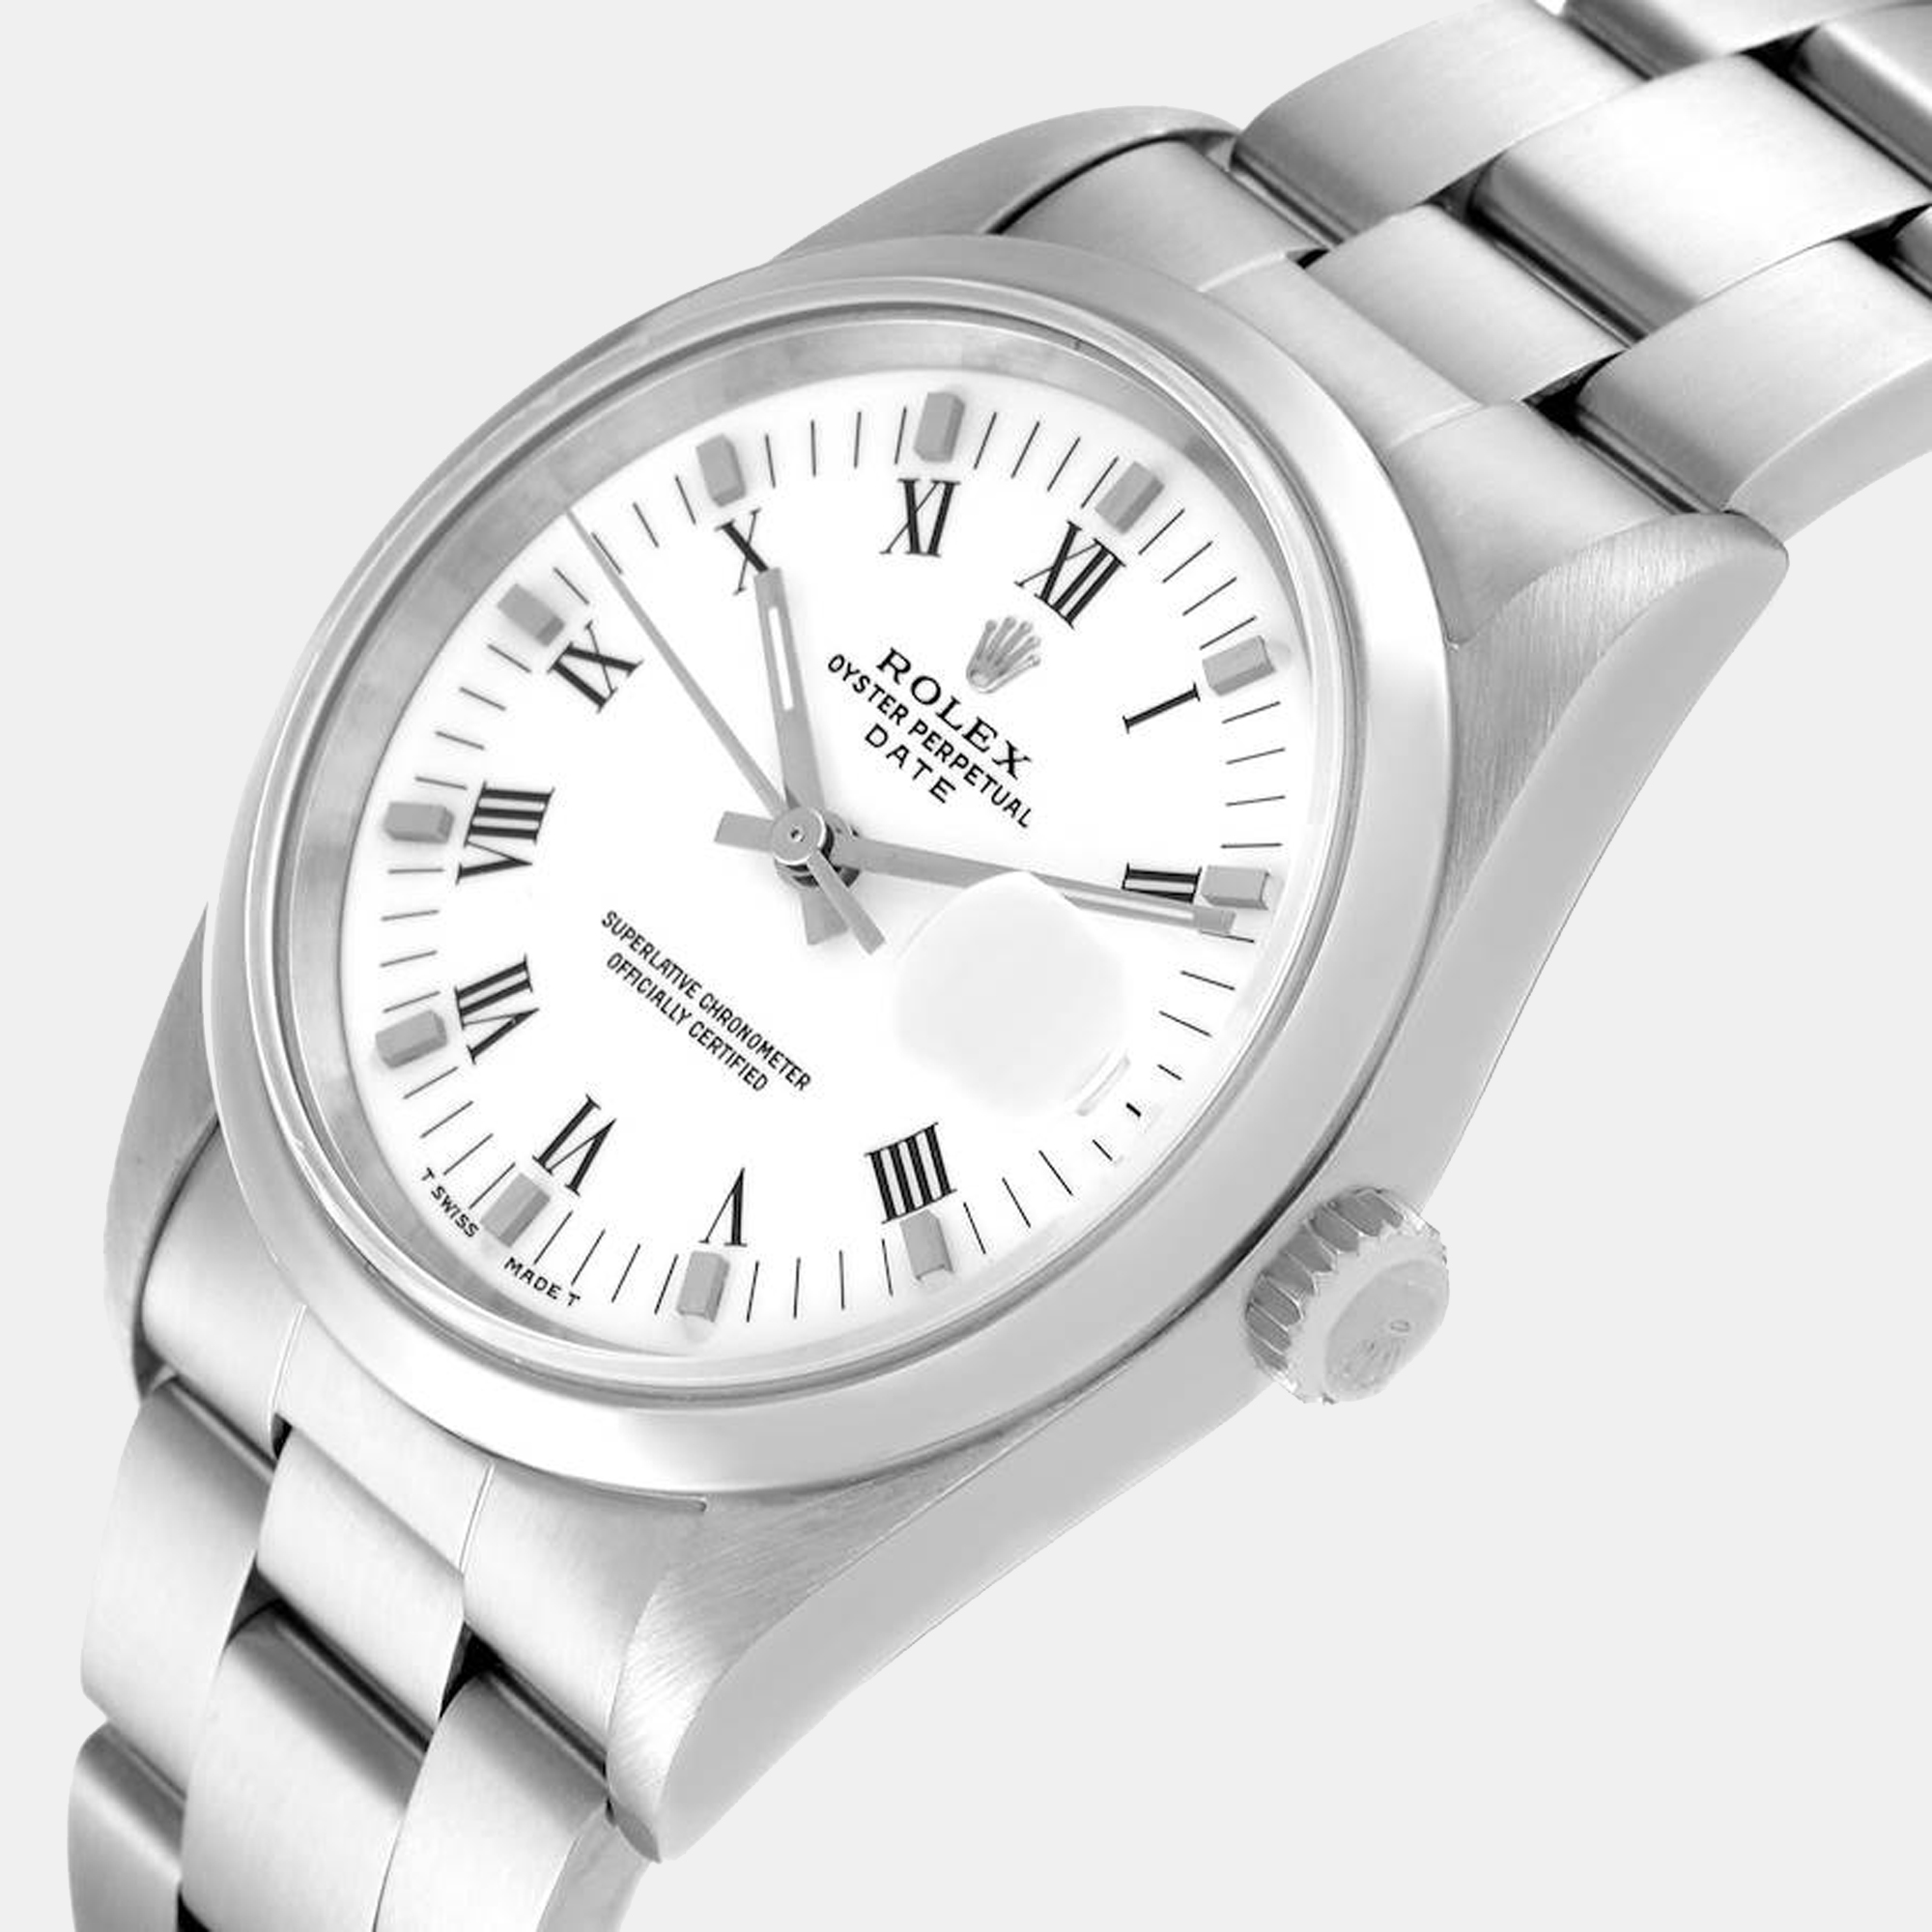 

Rolex White Stainless Steel Oyster Perpetual Date 15200 Men's Wristwatch 34 mm